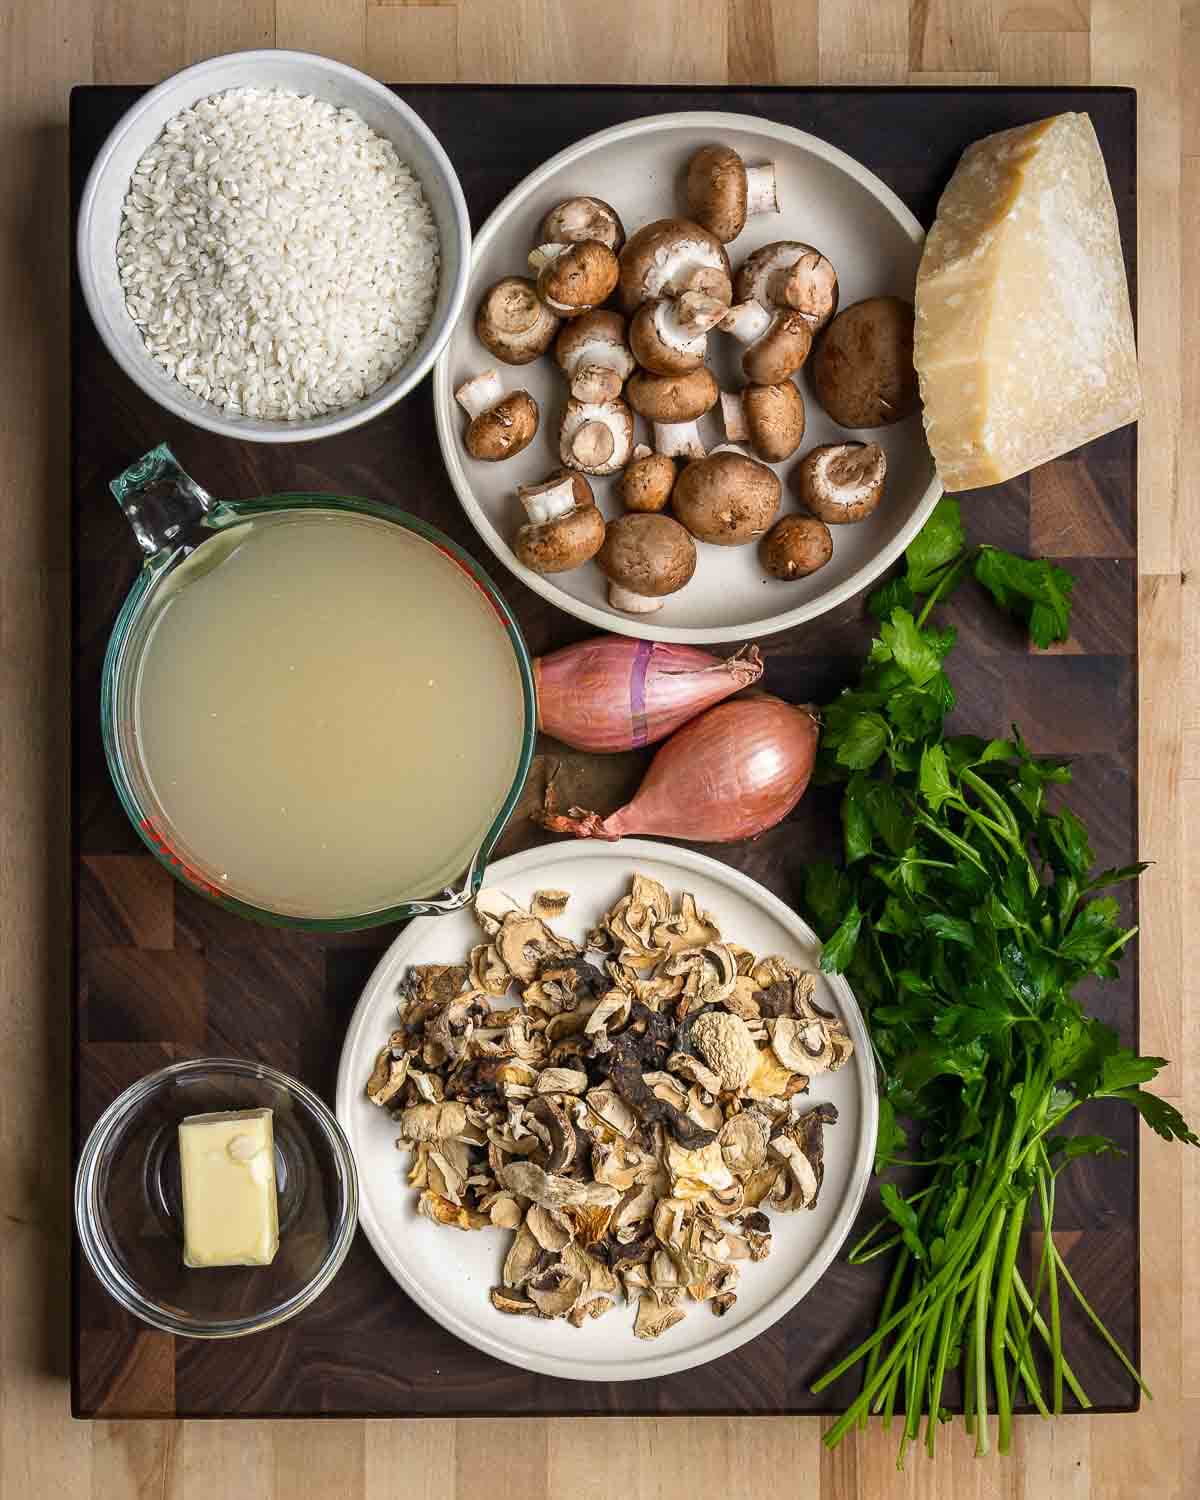 Ingredients shown: arborio rice, cremini mushrooms, Parmigiano Reggiano, chicken stock, shallots, butter, assorted dried mushrooms, and parsley.